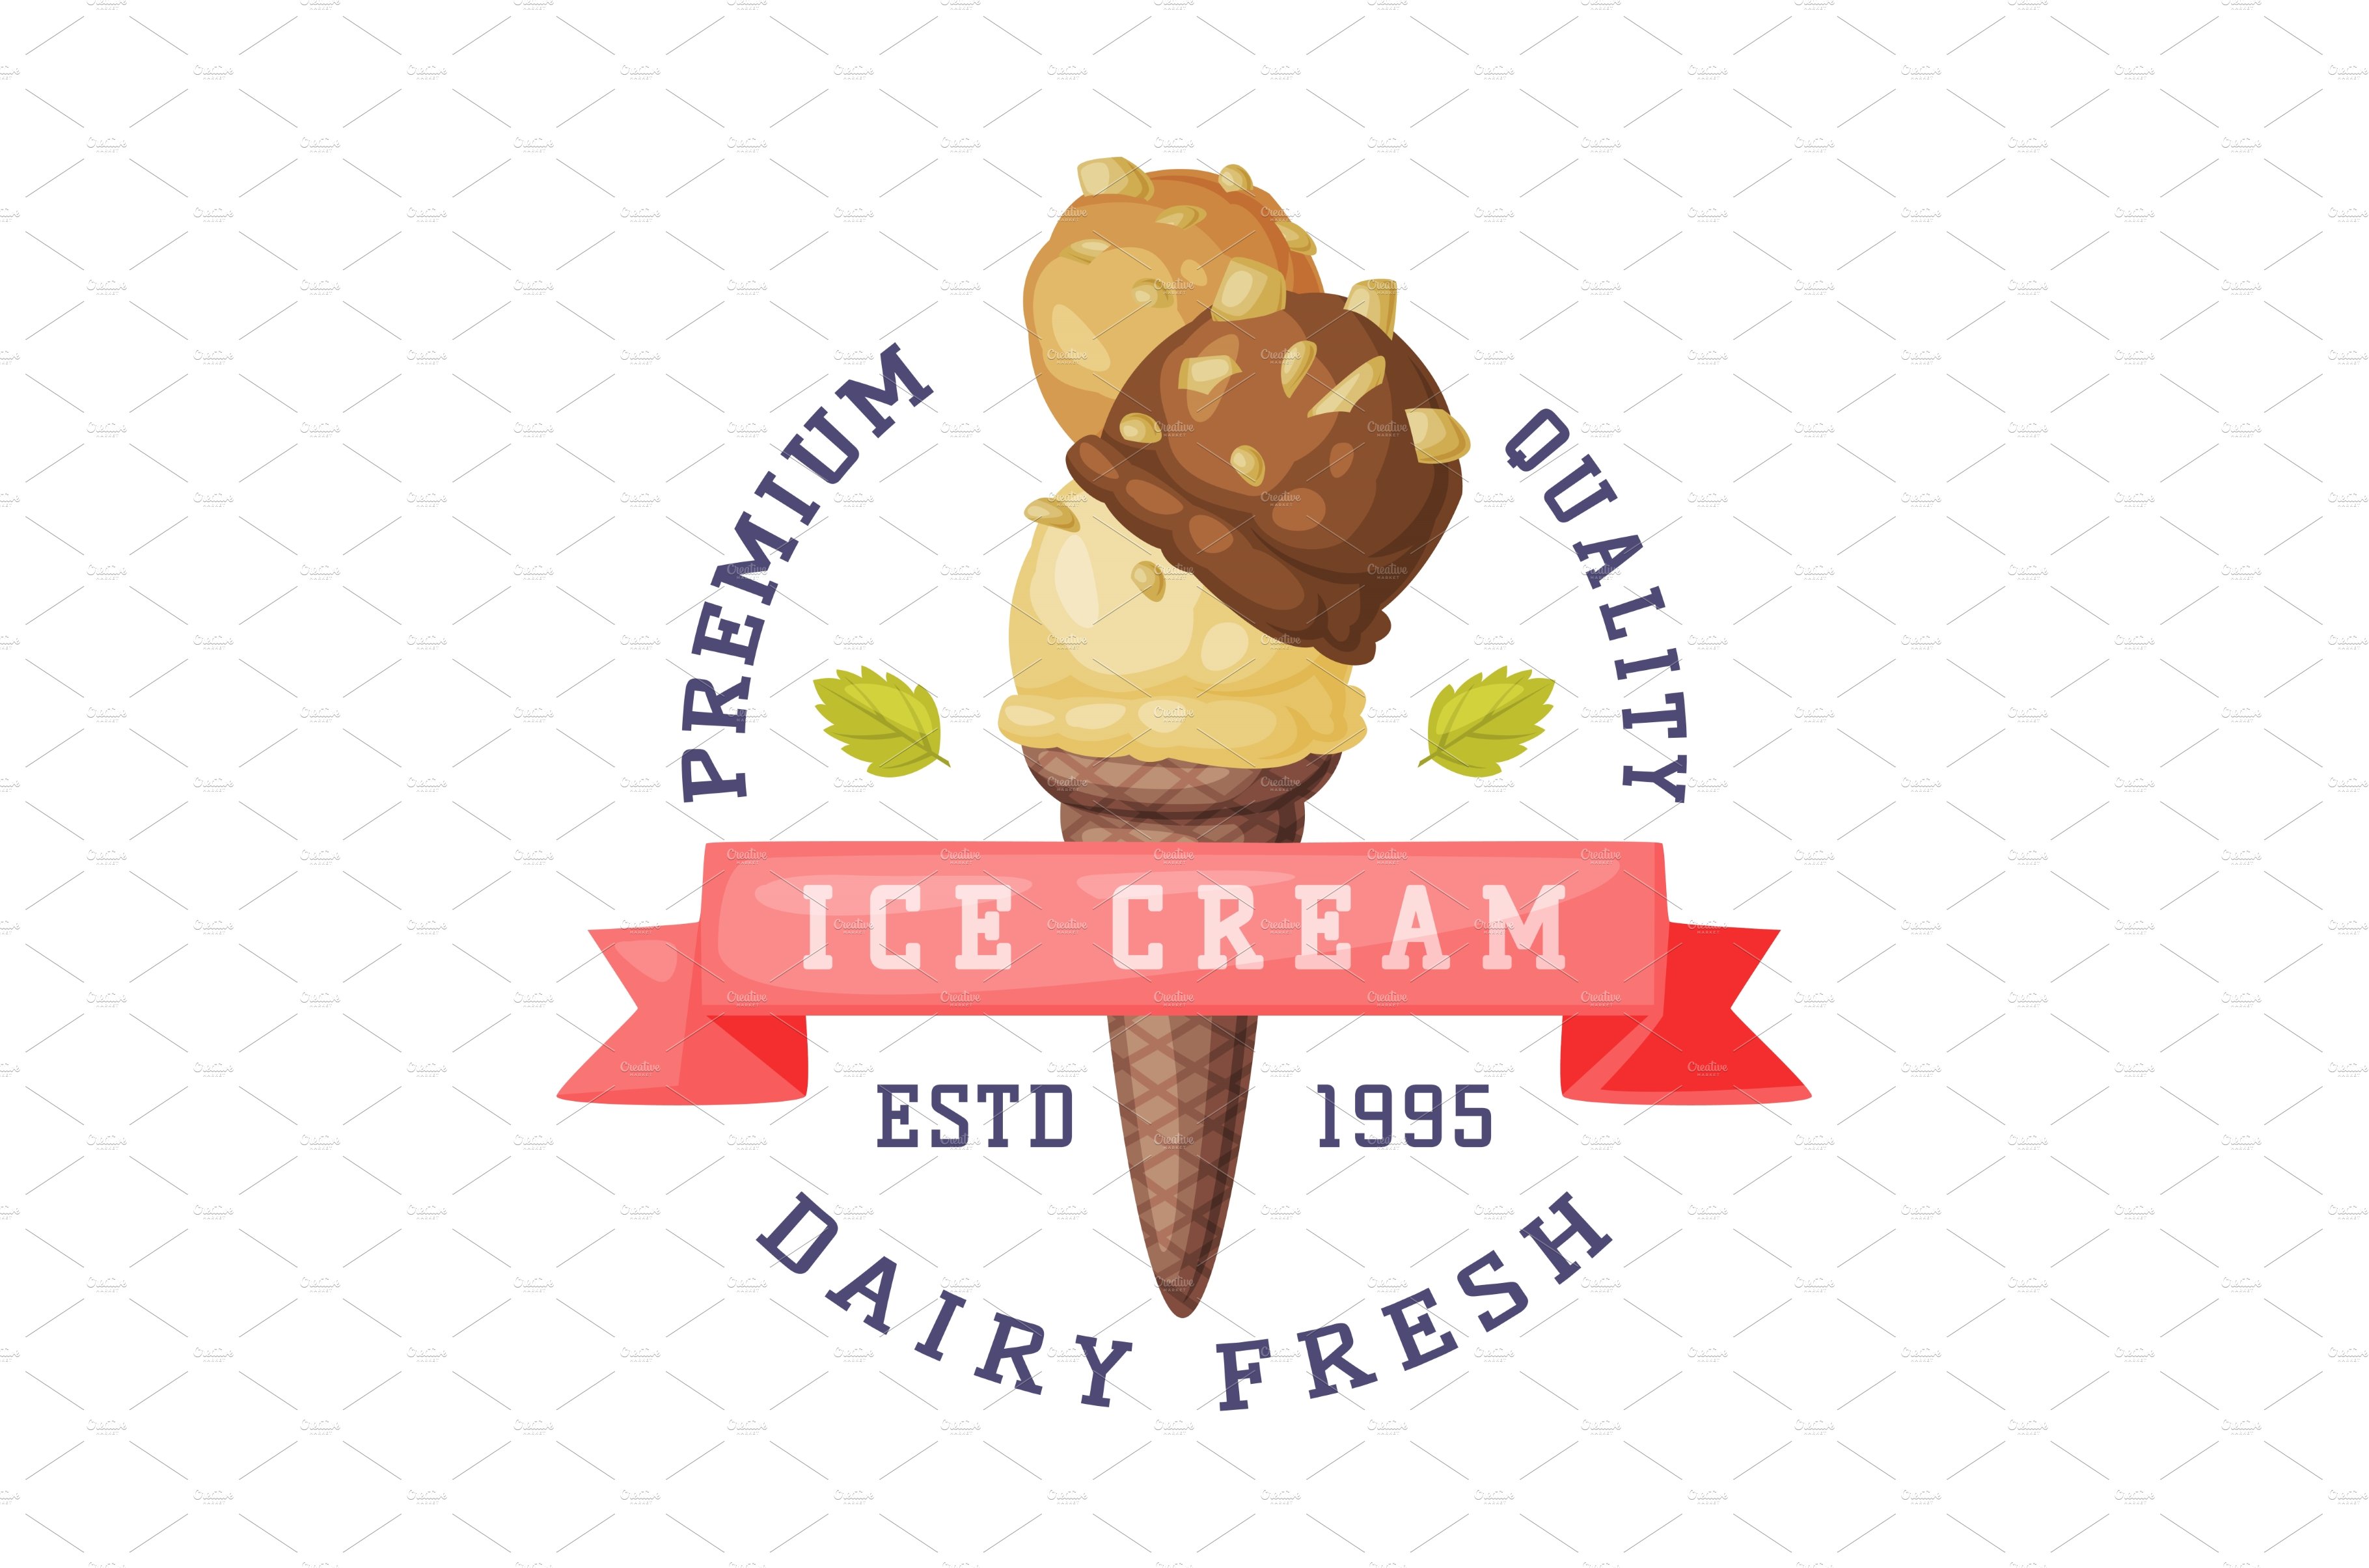 Ice Cream Emblem and Badge with cover image.